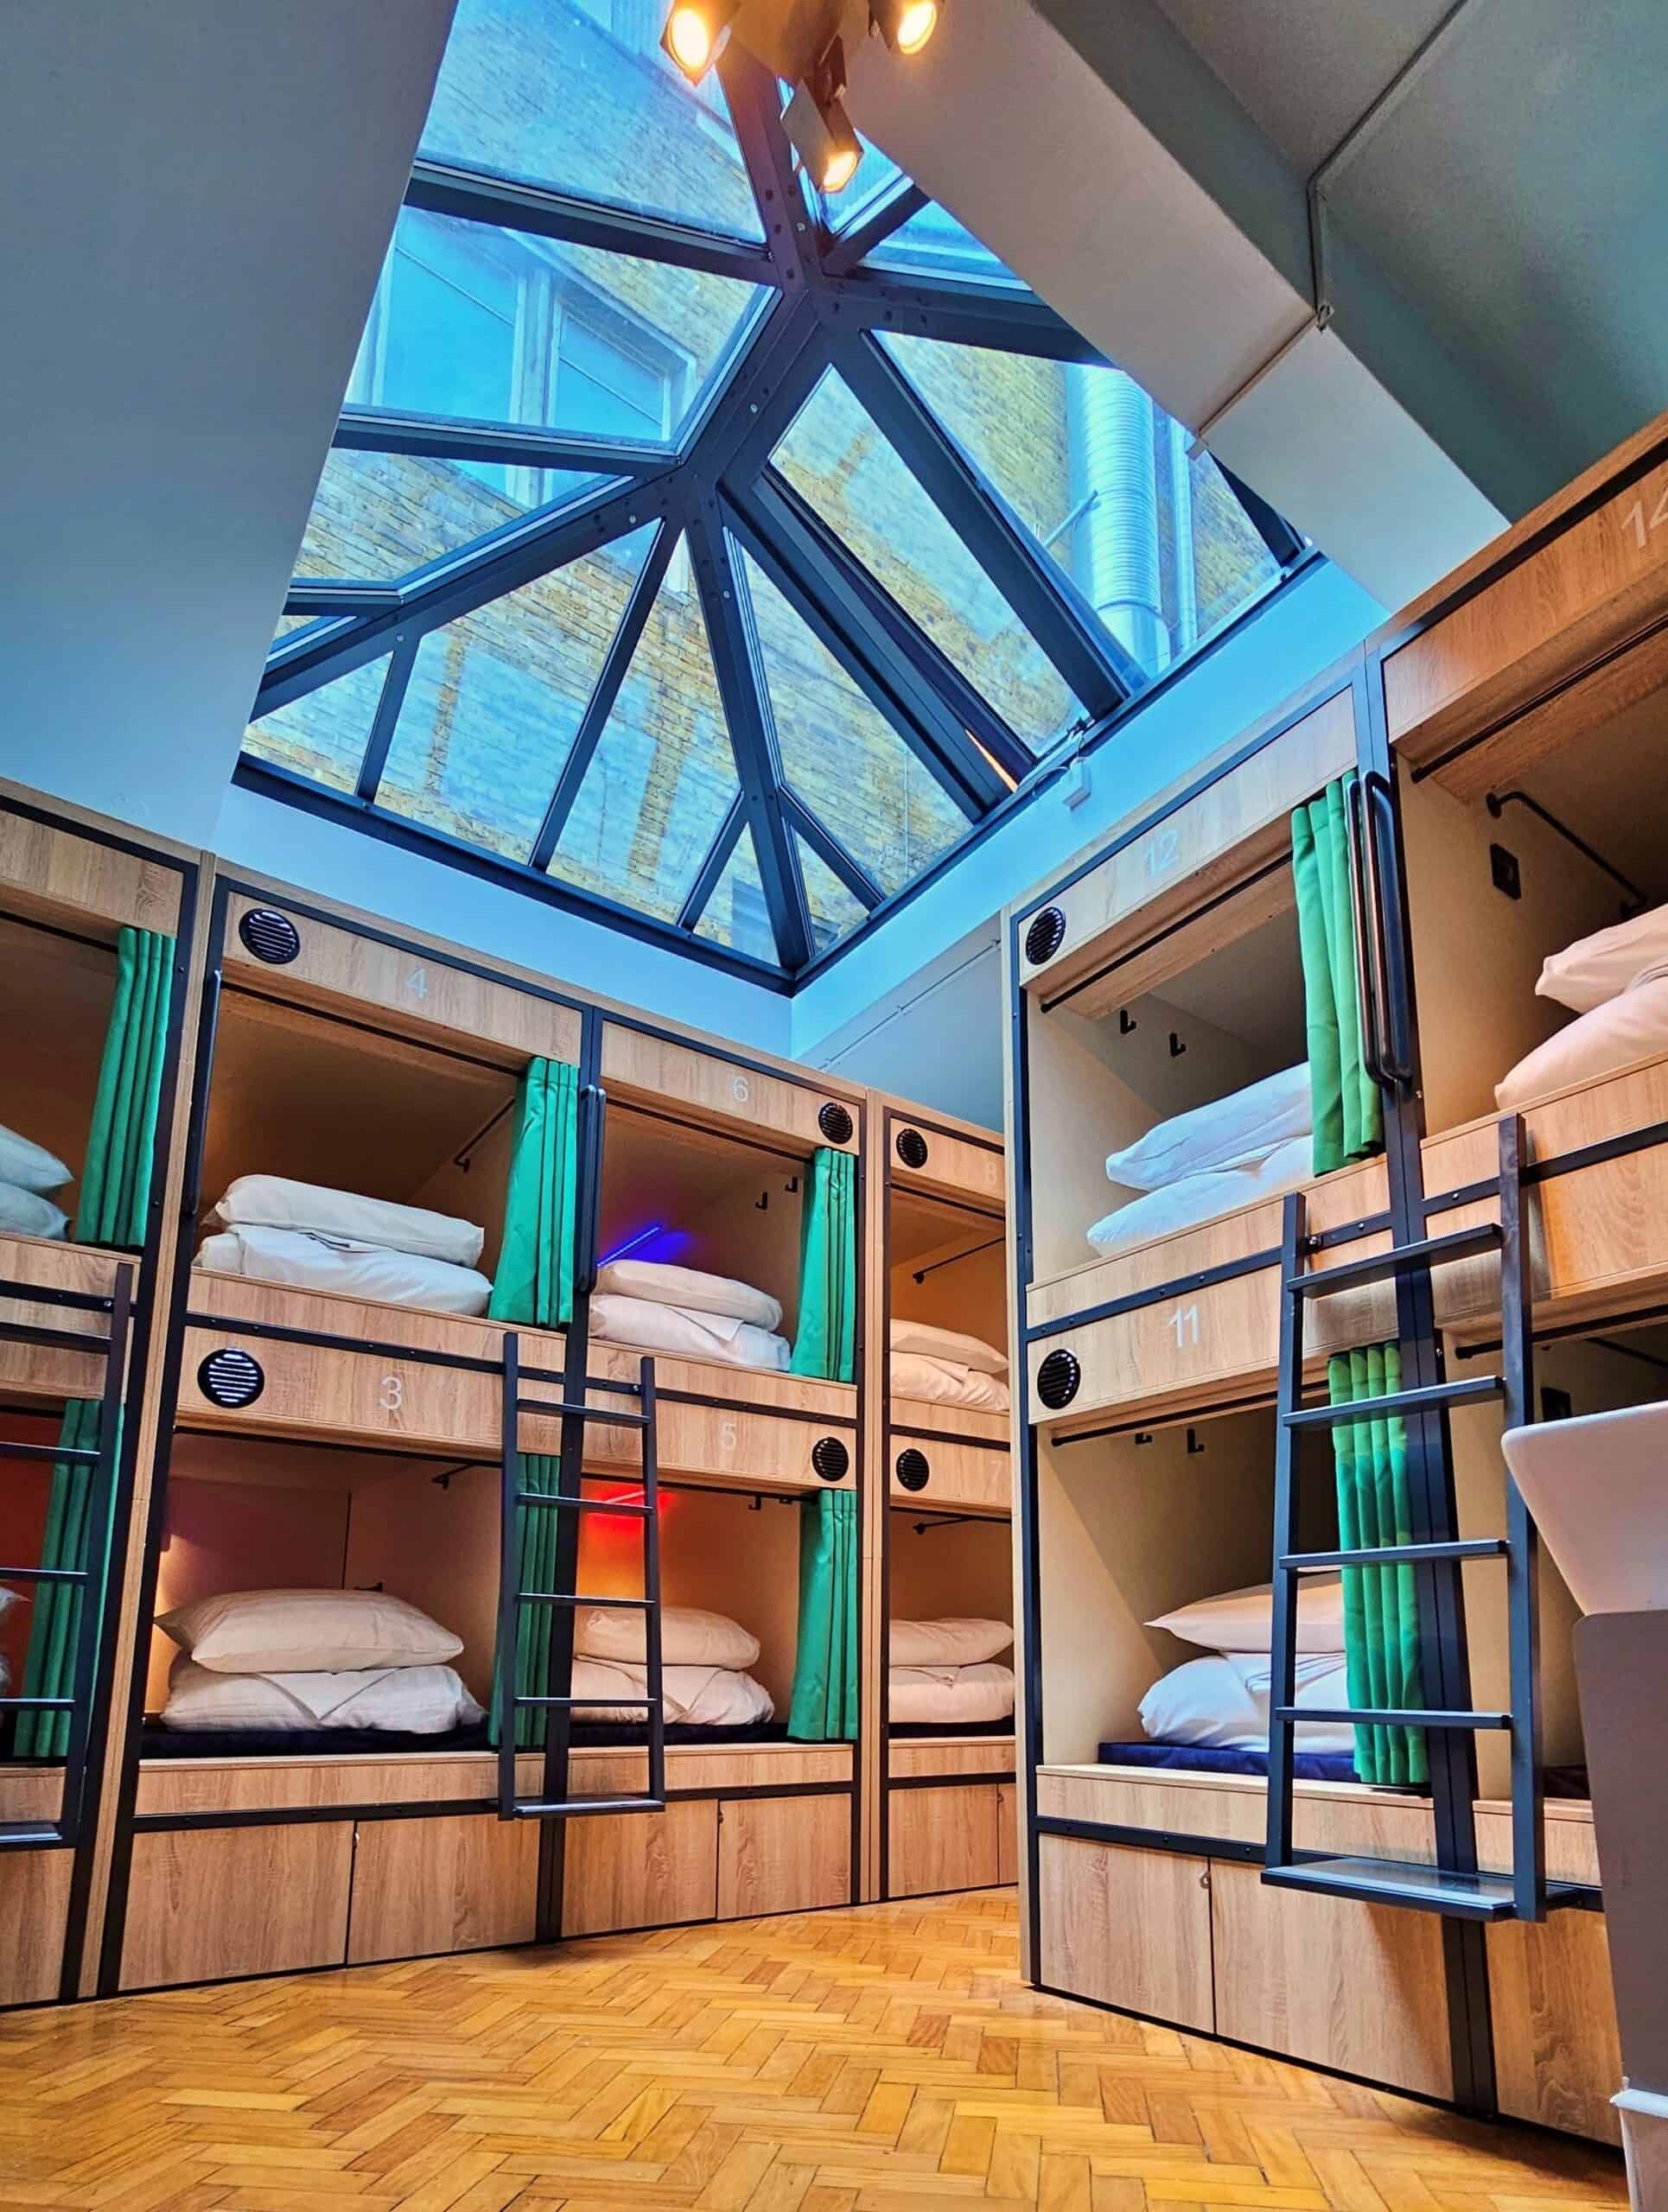 Pod beds at Clink 261 in London